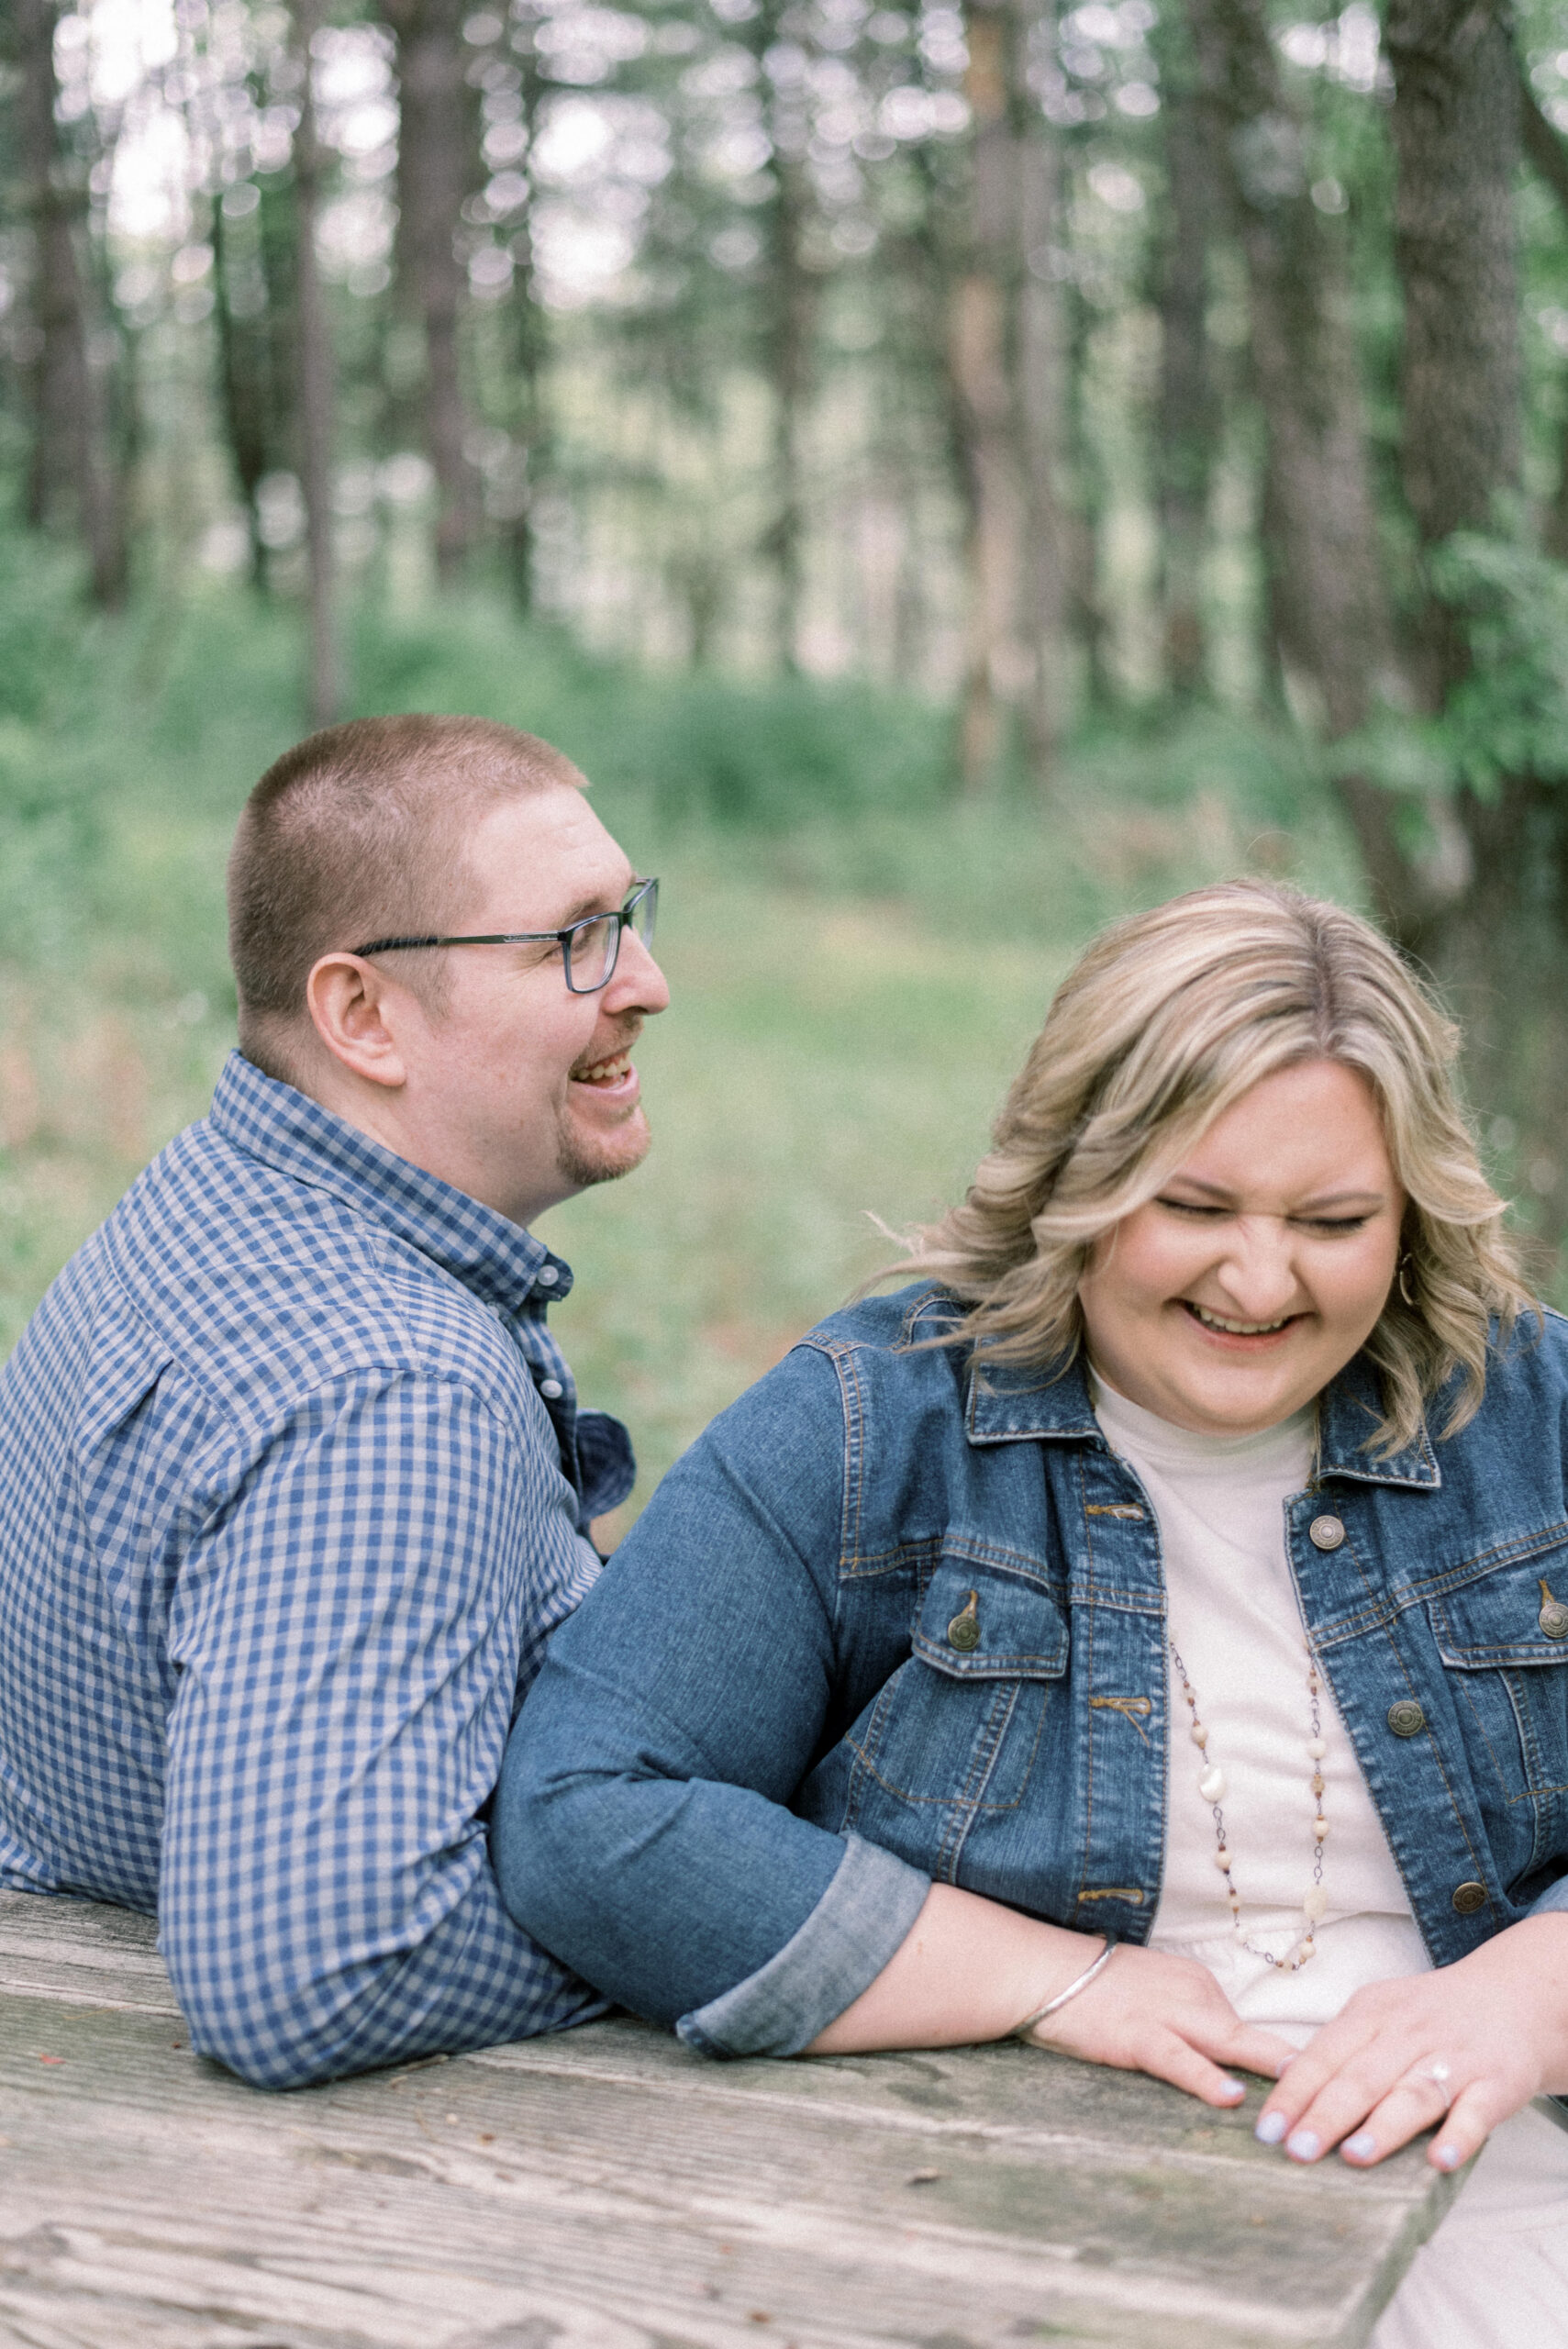 Pennsylvania wedding photographer captures man and woman laughing while sitting together